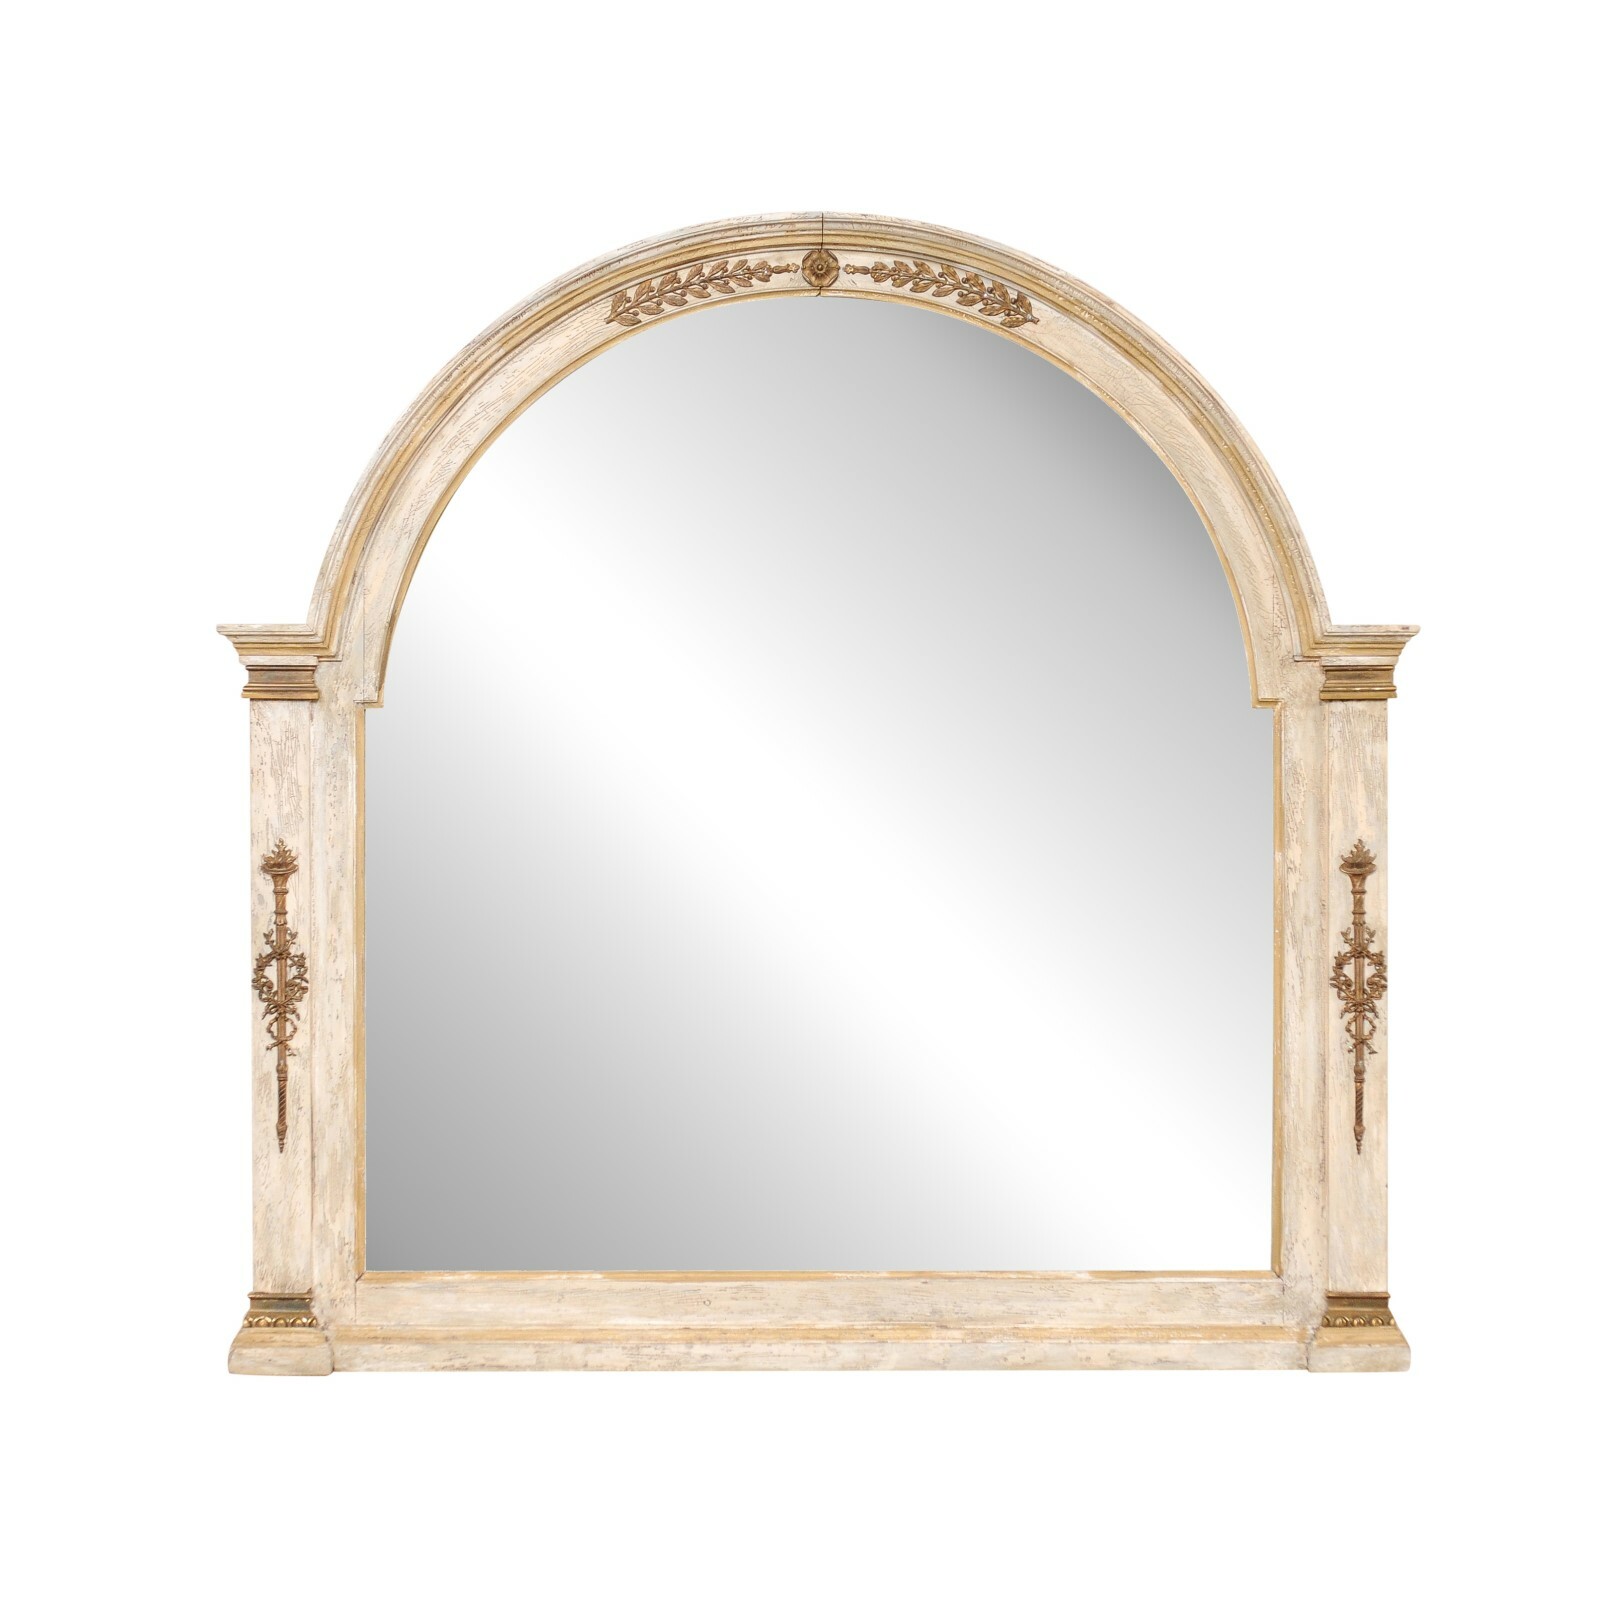 Early 20th C. French Painted Arched Mirror